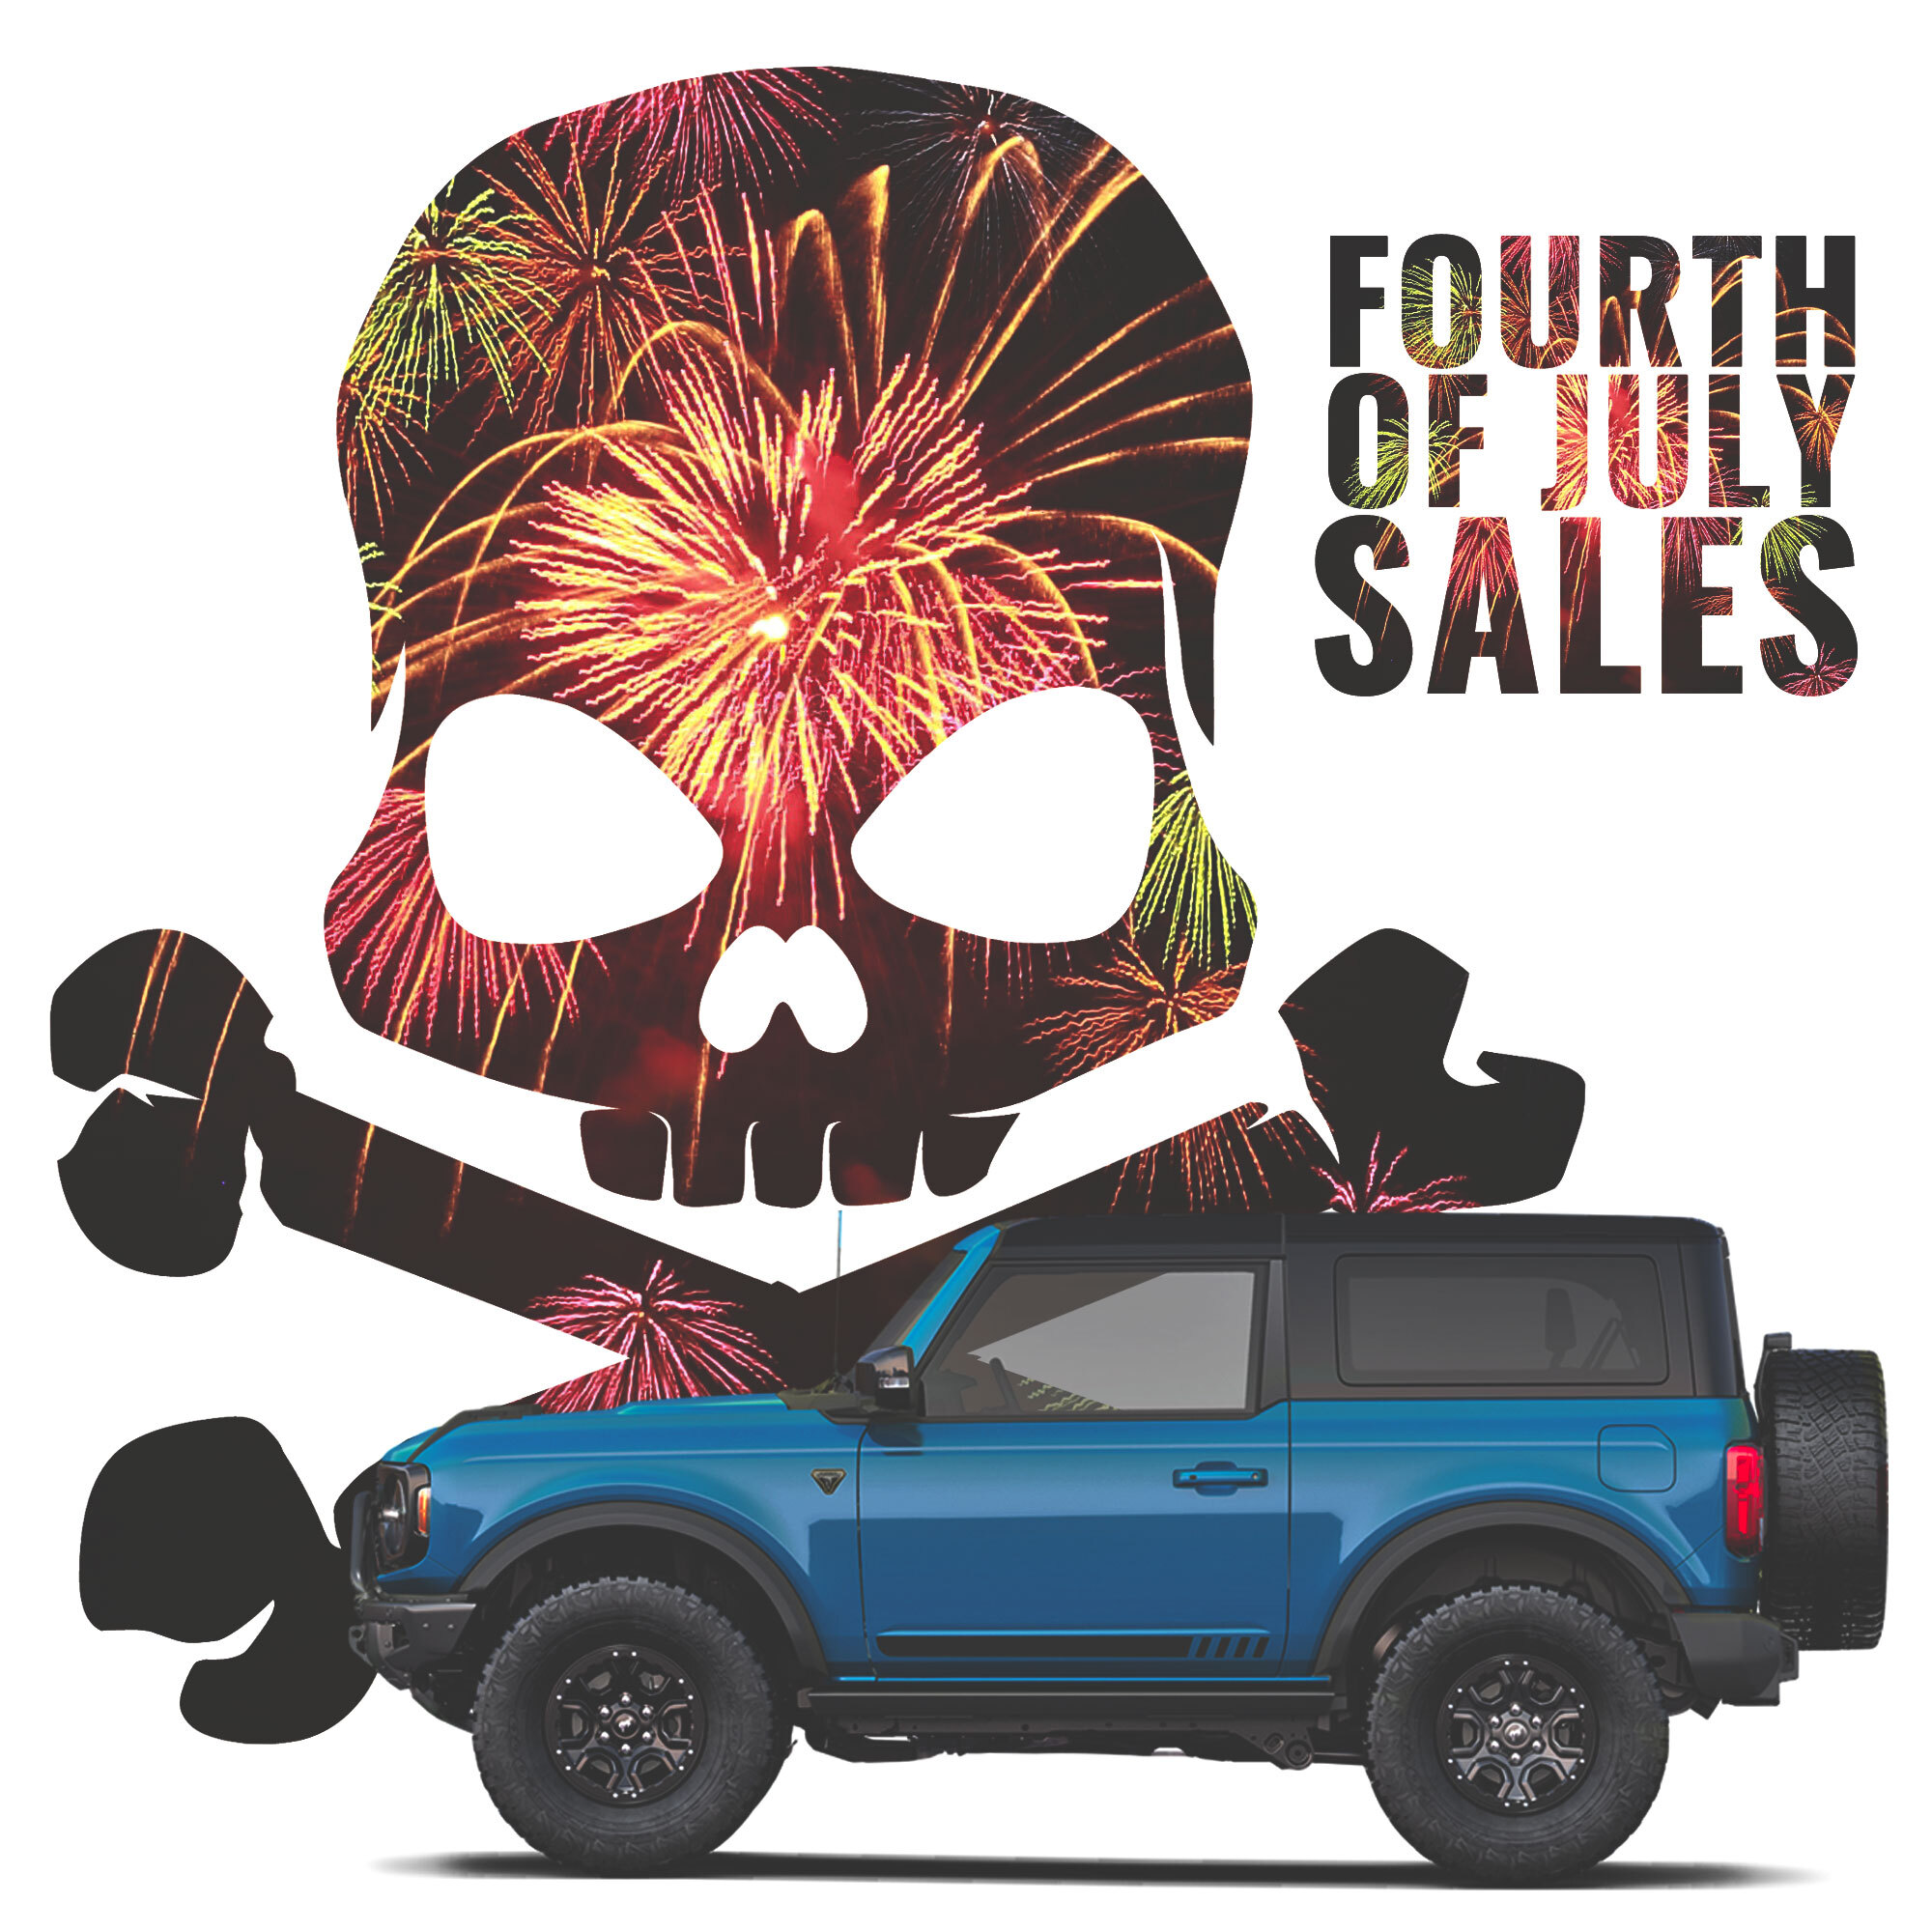 Ford Bronco 4th of July SALES kick off today!! Site-wide, Lethal Performance Drag Packs & MORE!!! fbad_1x1